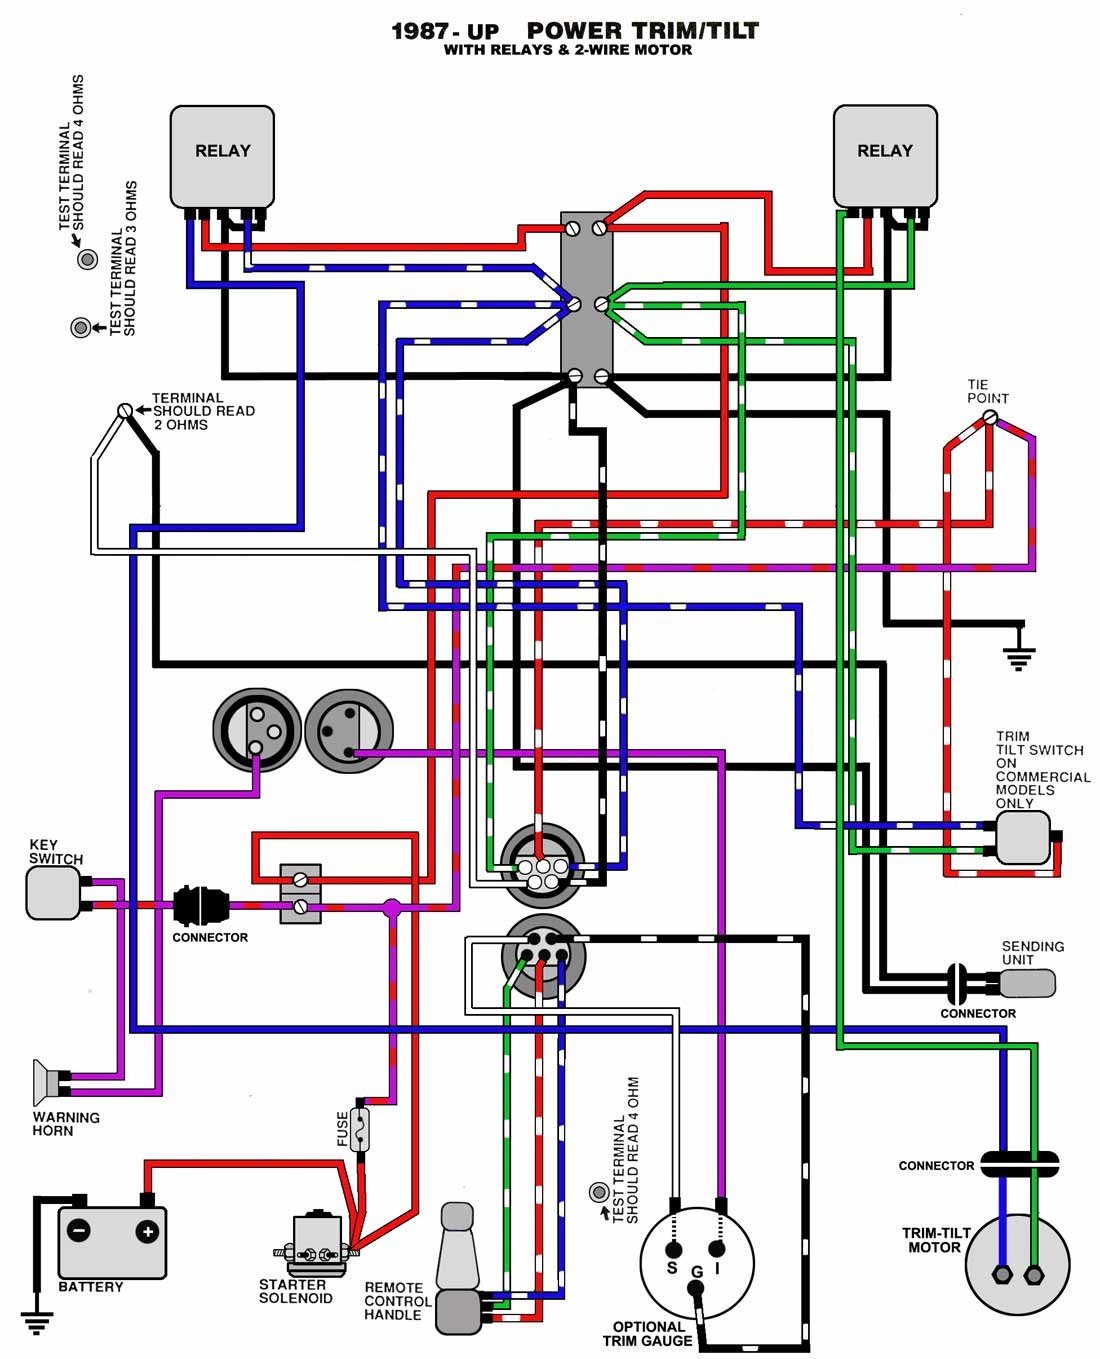 Ignition Switch Mercury Outboard Wiring Diagram Schematic from mainetreasurechest.com